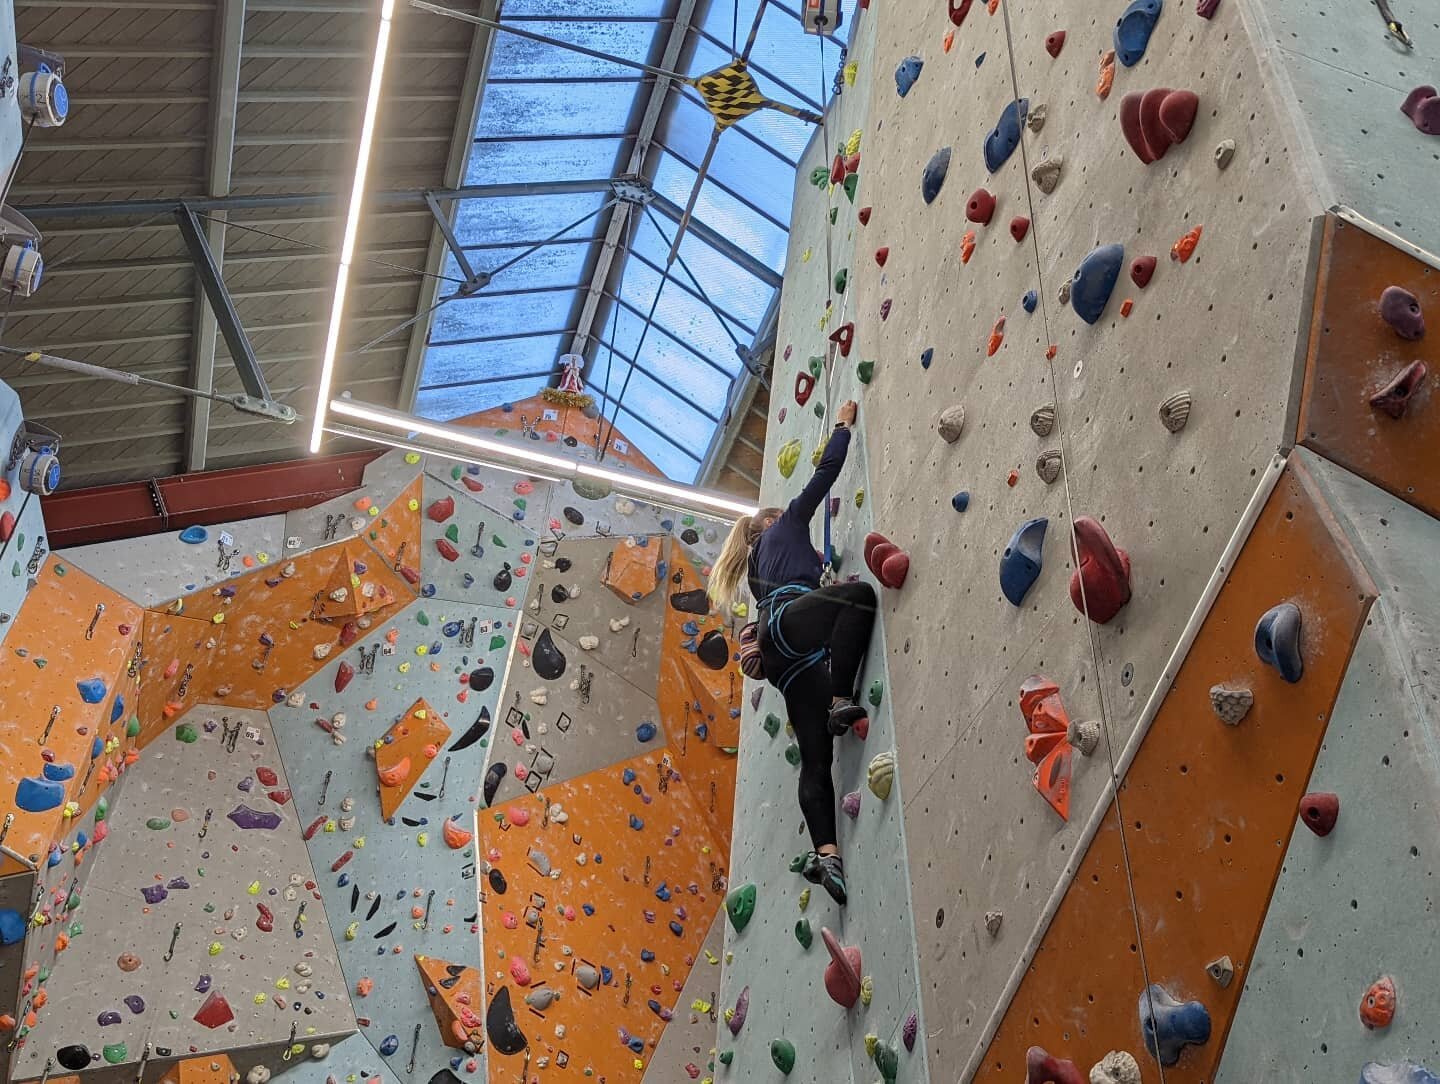 Alysha joined us today to continue practicing her indoor lead climbing and learn some climbing techniques under the supervision of a nationally qualified development coach.  Today we went to @the_quay_climbing_centre

Lots of leads covered, air miles